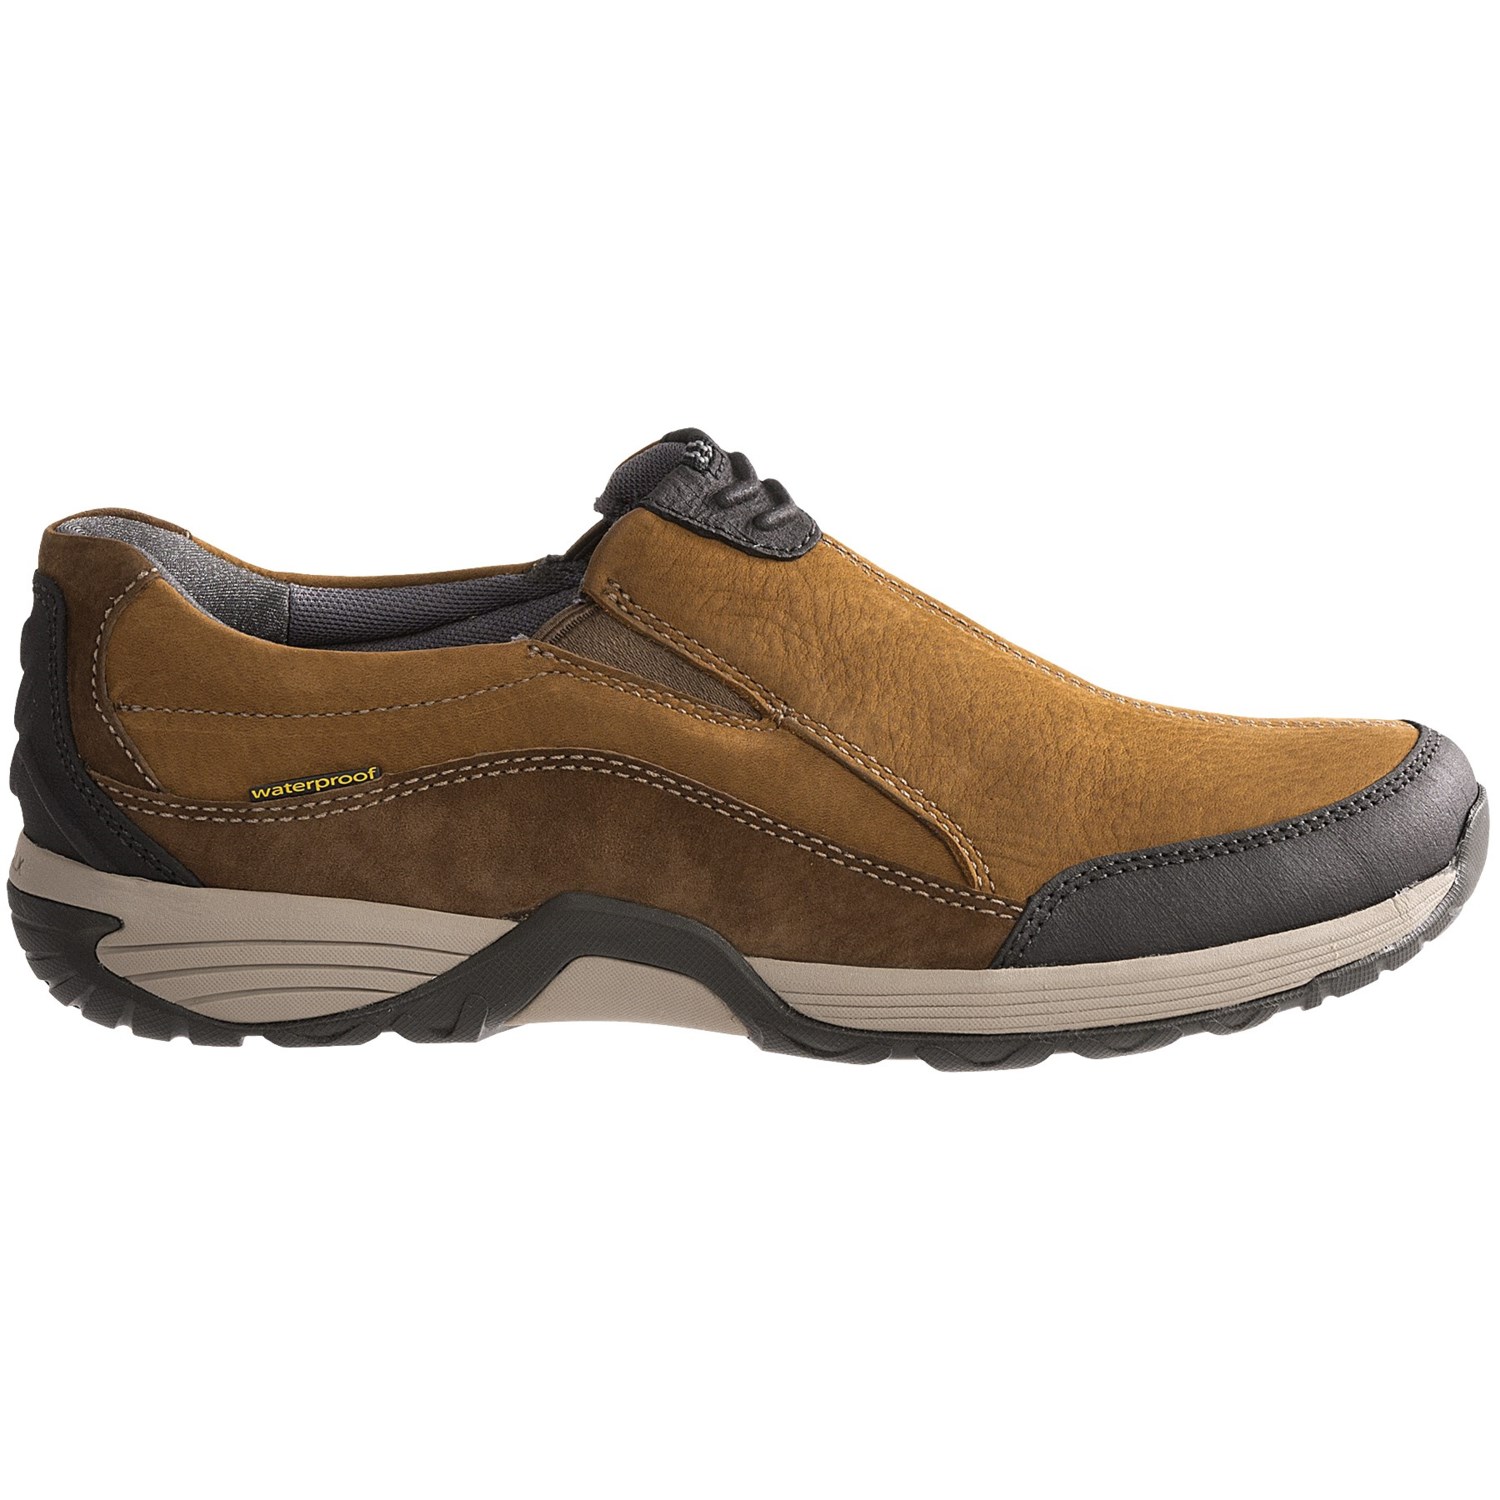 Clarks Wave.Frontier Slip-On Shoes (For Men) 6422W - Save 33%